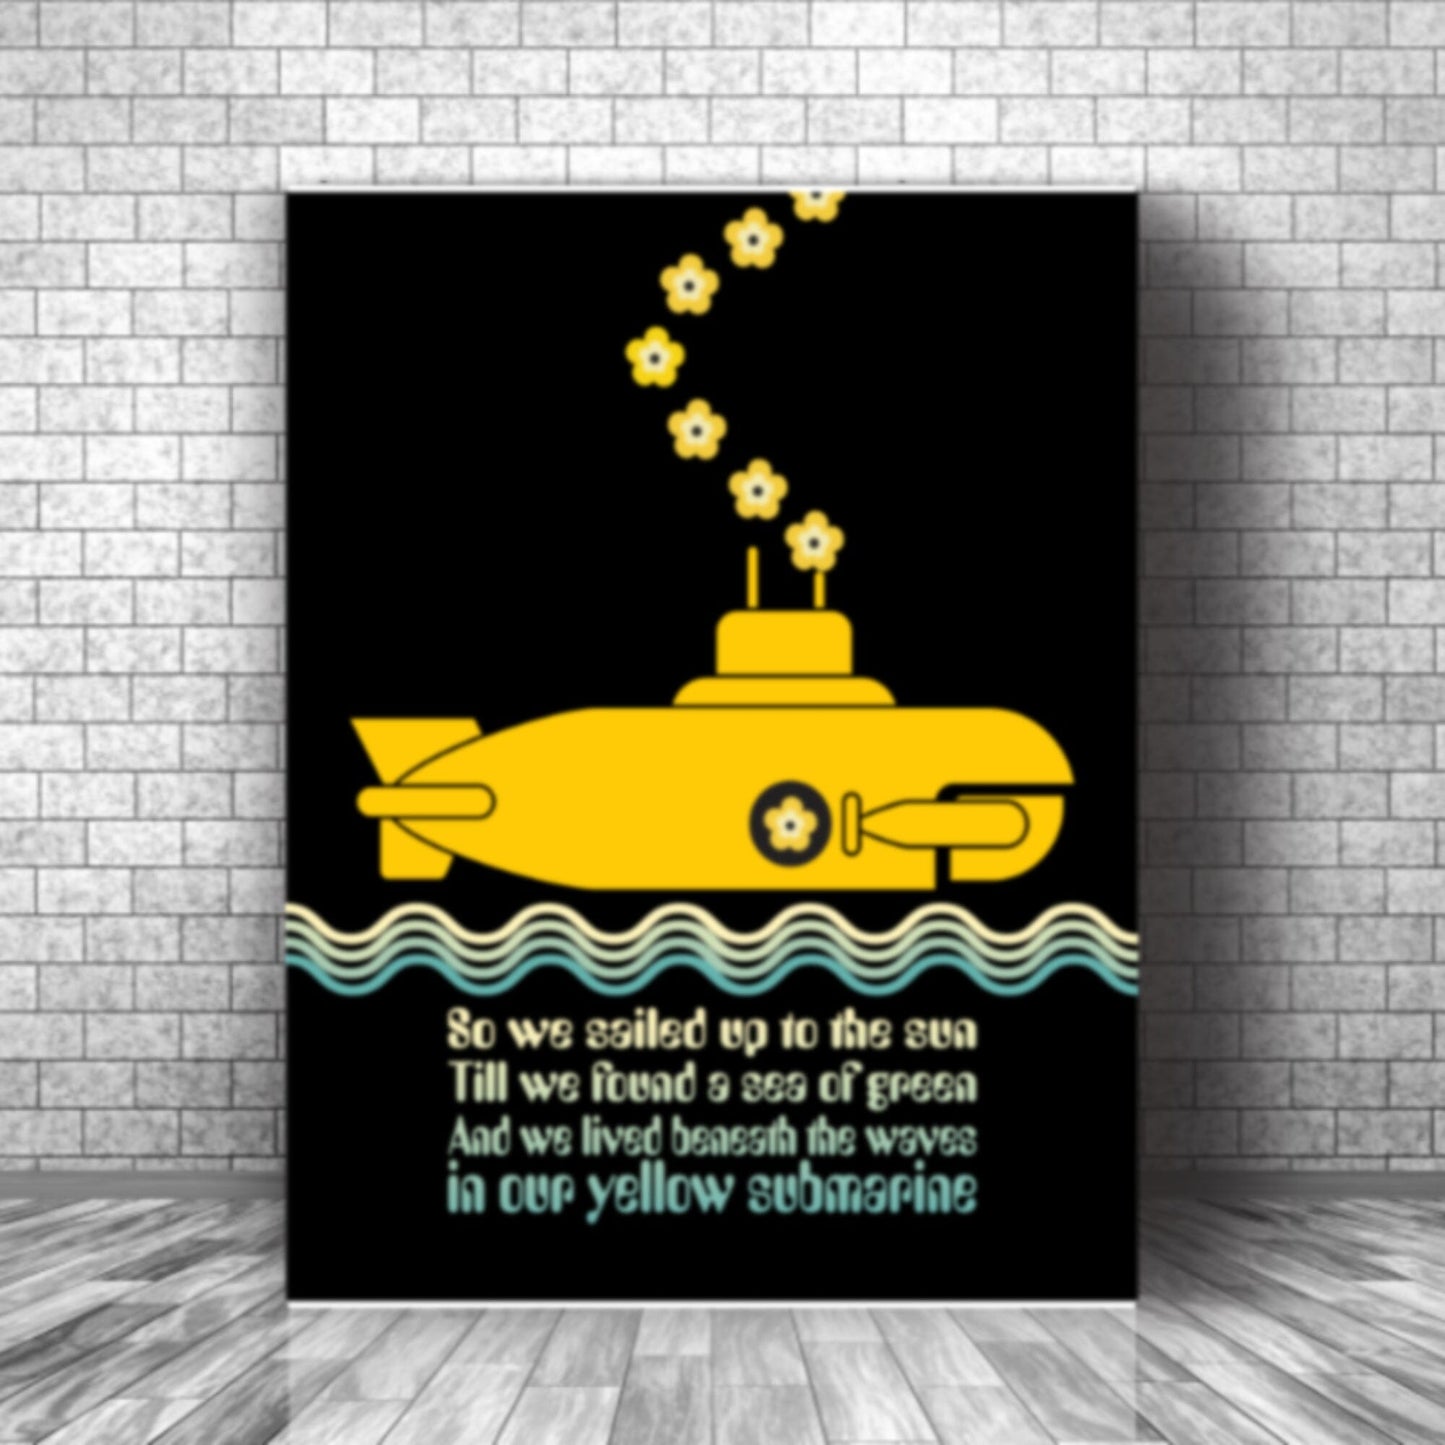 Yellow Submarine by the Beatles - Print Song Lyric Music Art Song Lyrics Art Song Lyrics Art 11x14 Canvas Wrap 